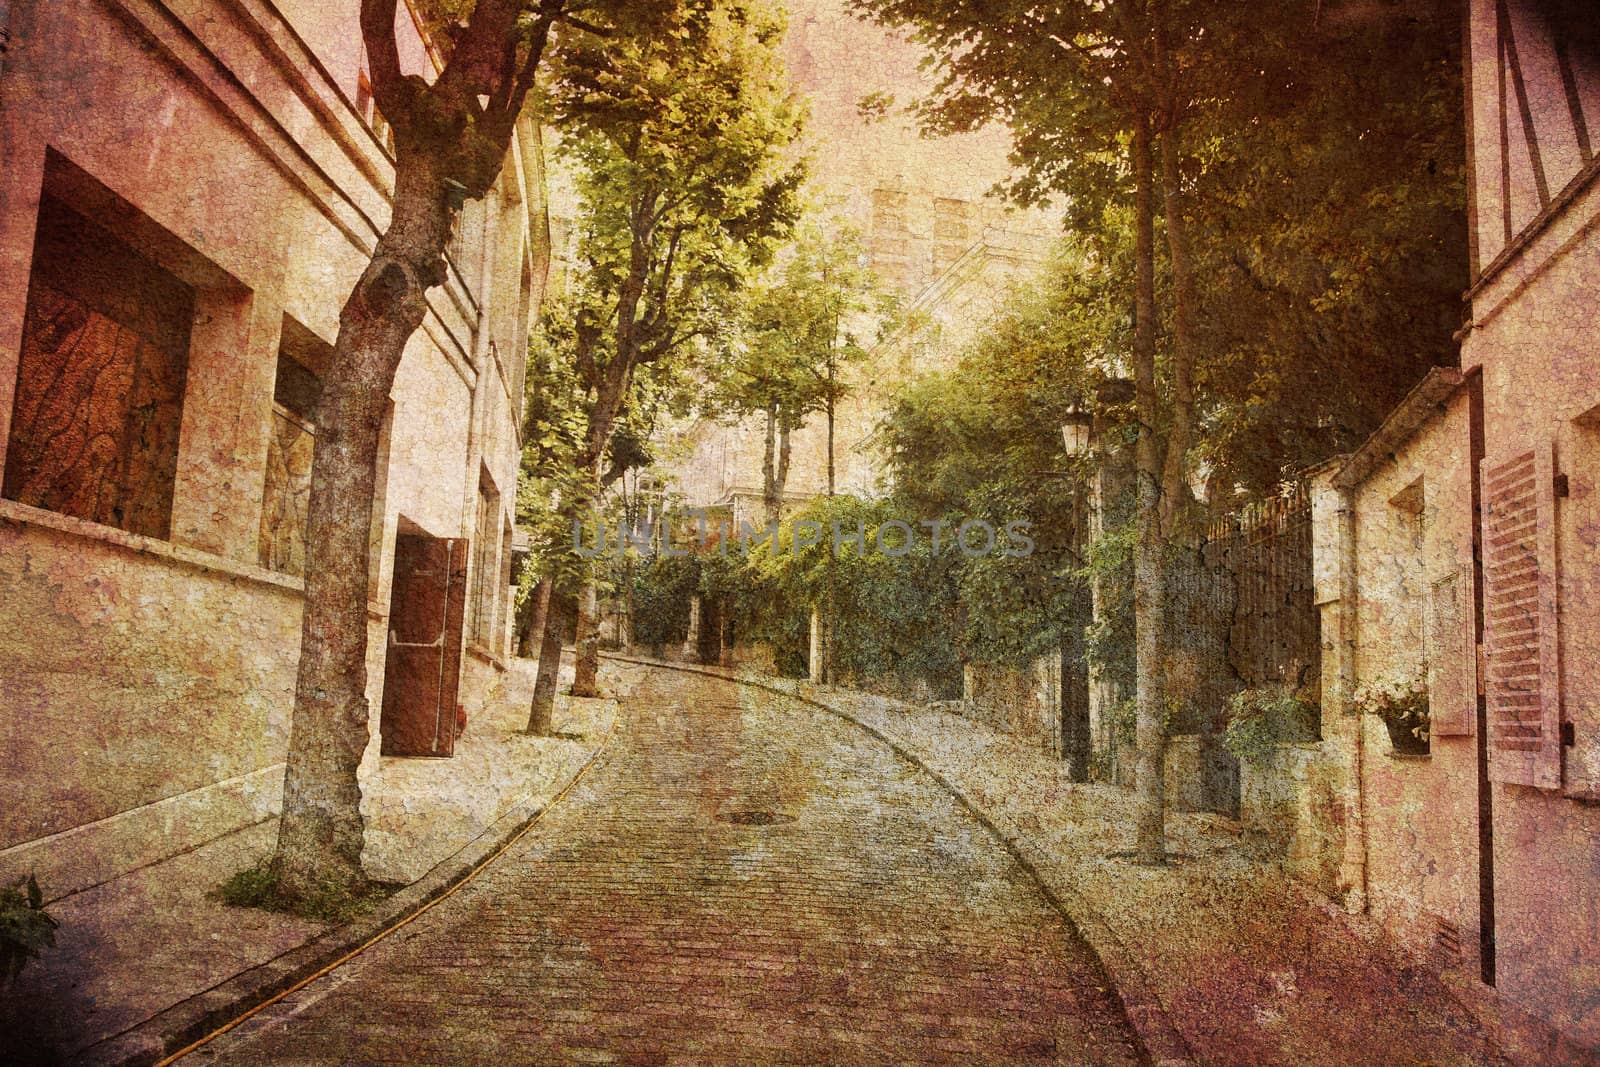 Like an old Japanese print. Several of my photos worked together to make a dreamlike retro look. Alley Montmartre, Paris.